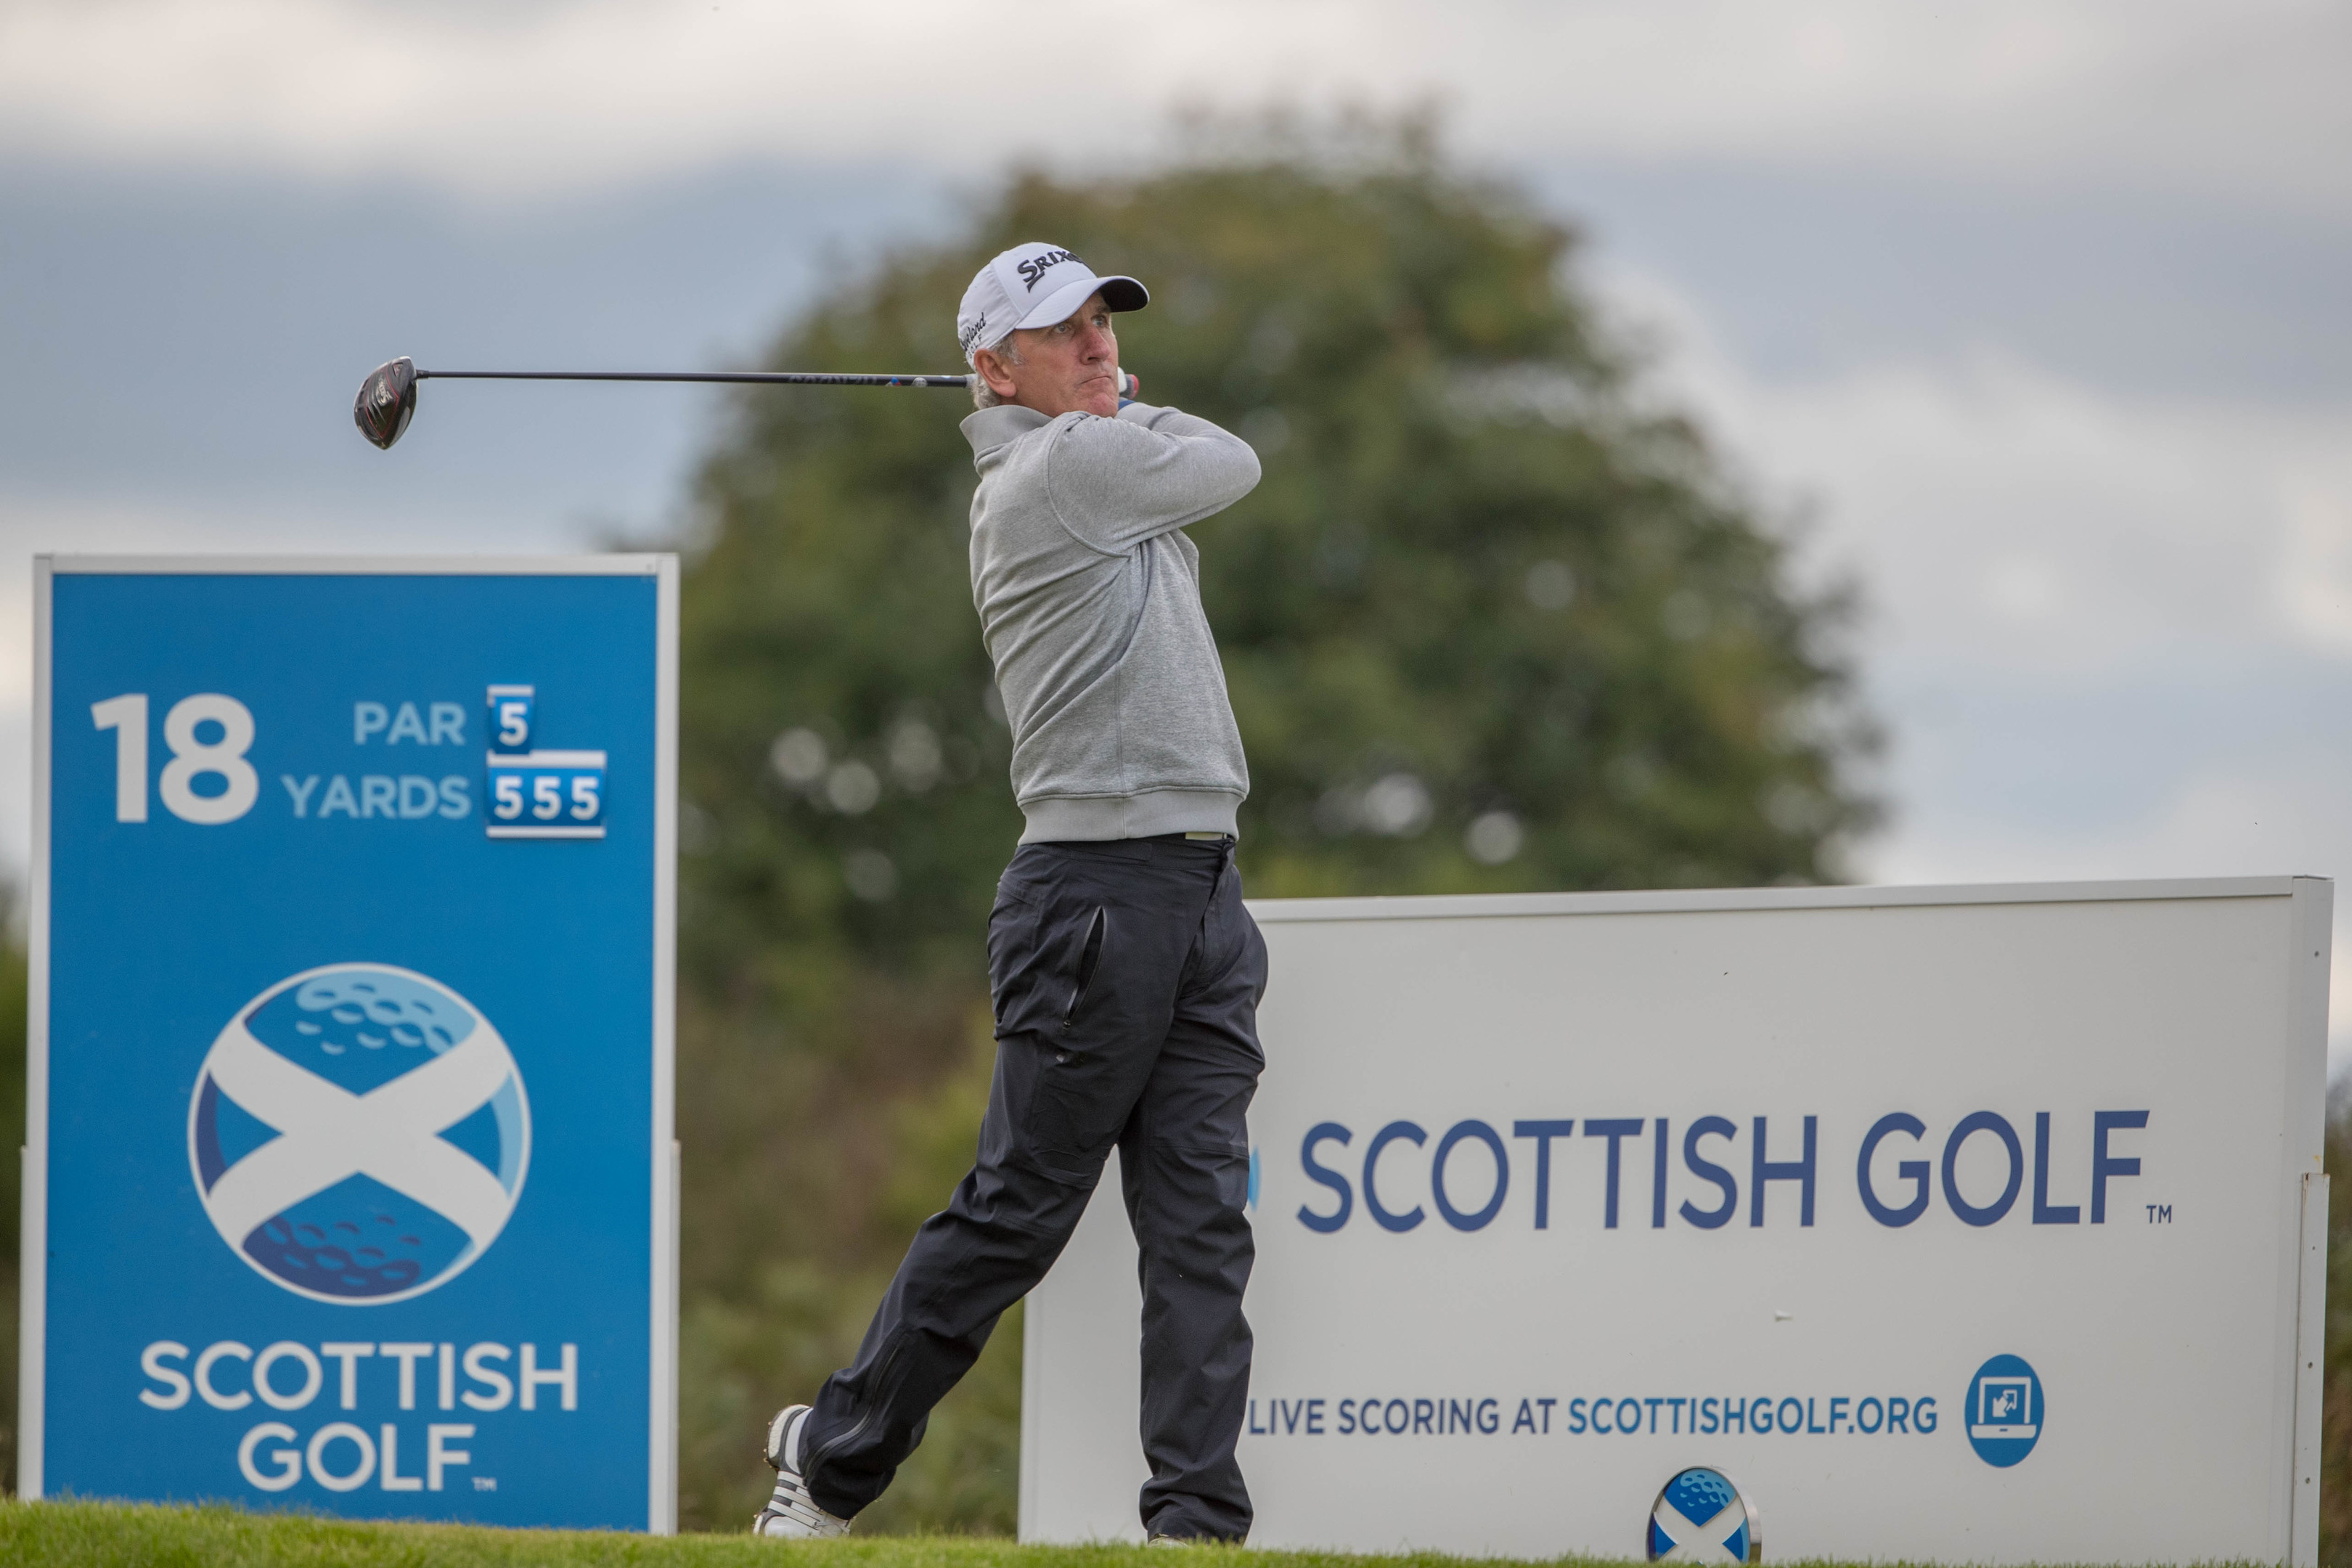 Euan McIntosh, bidding for a Scottish Amateur Championship matchplay and strokeplay double, is one off the lead after 18 holes.